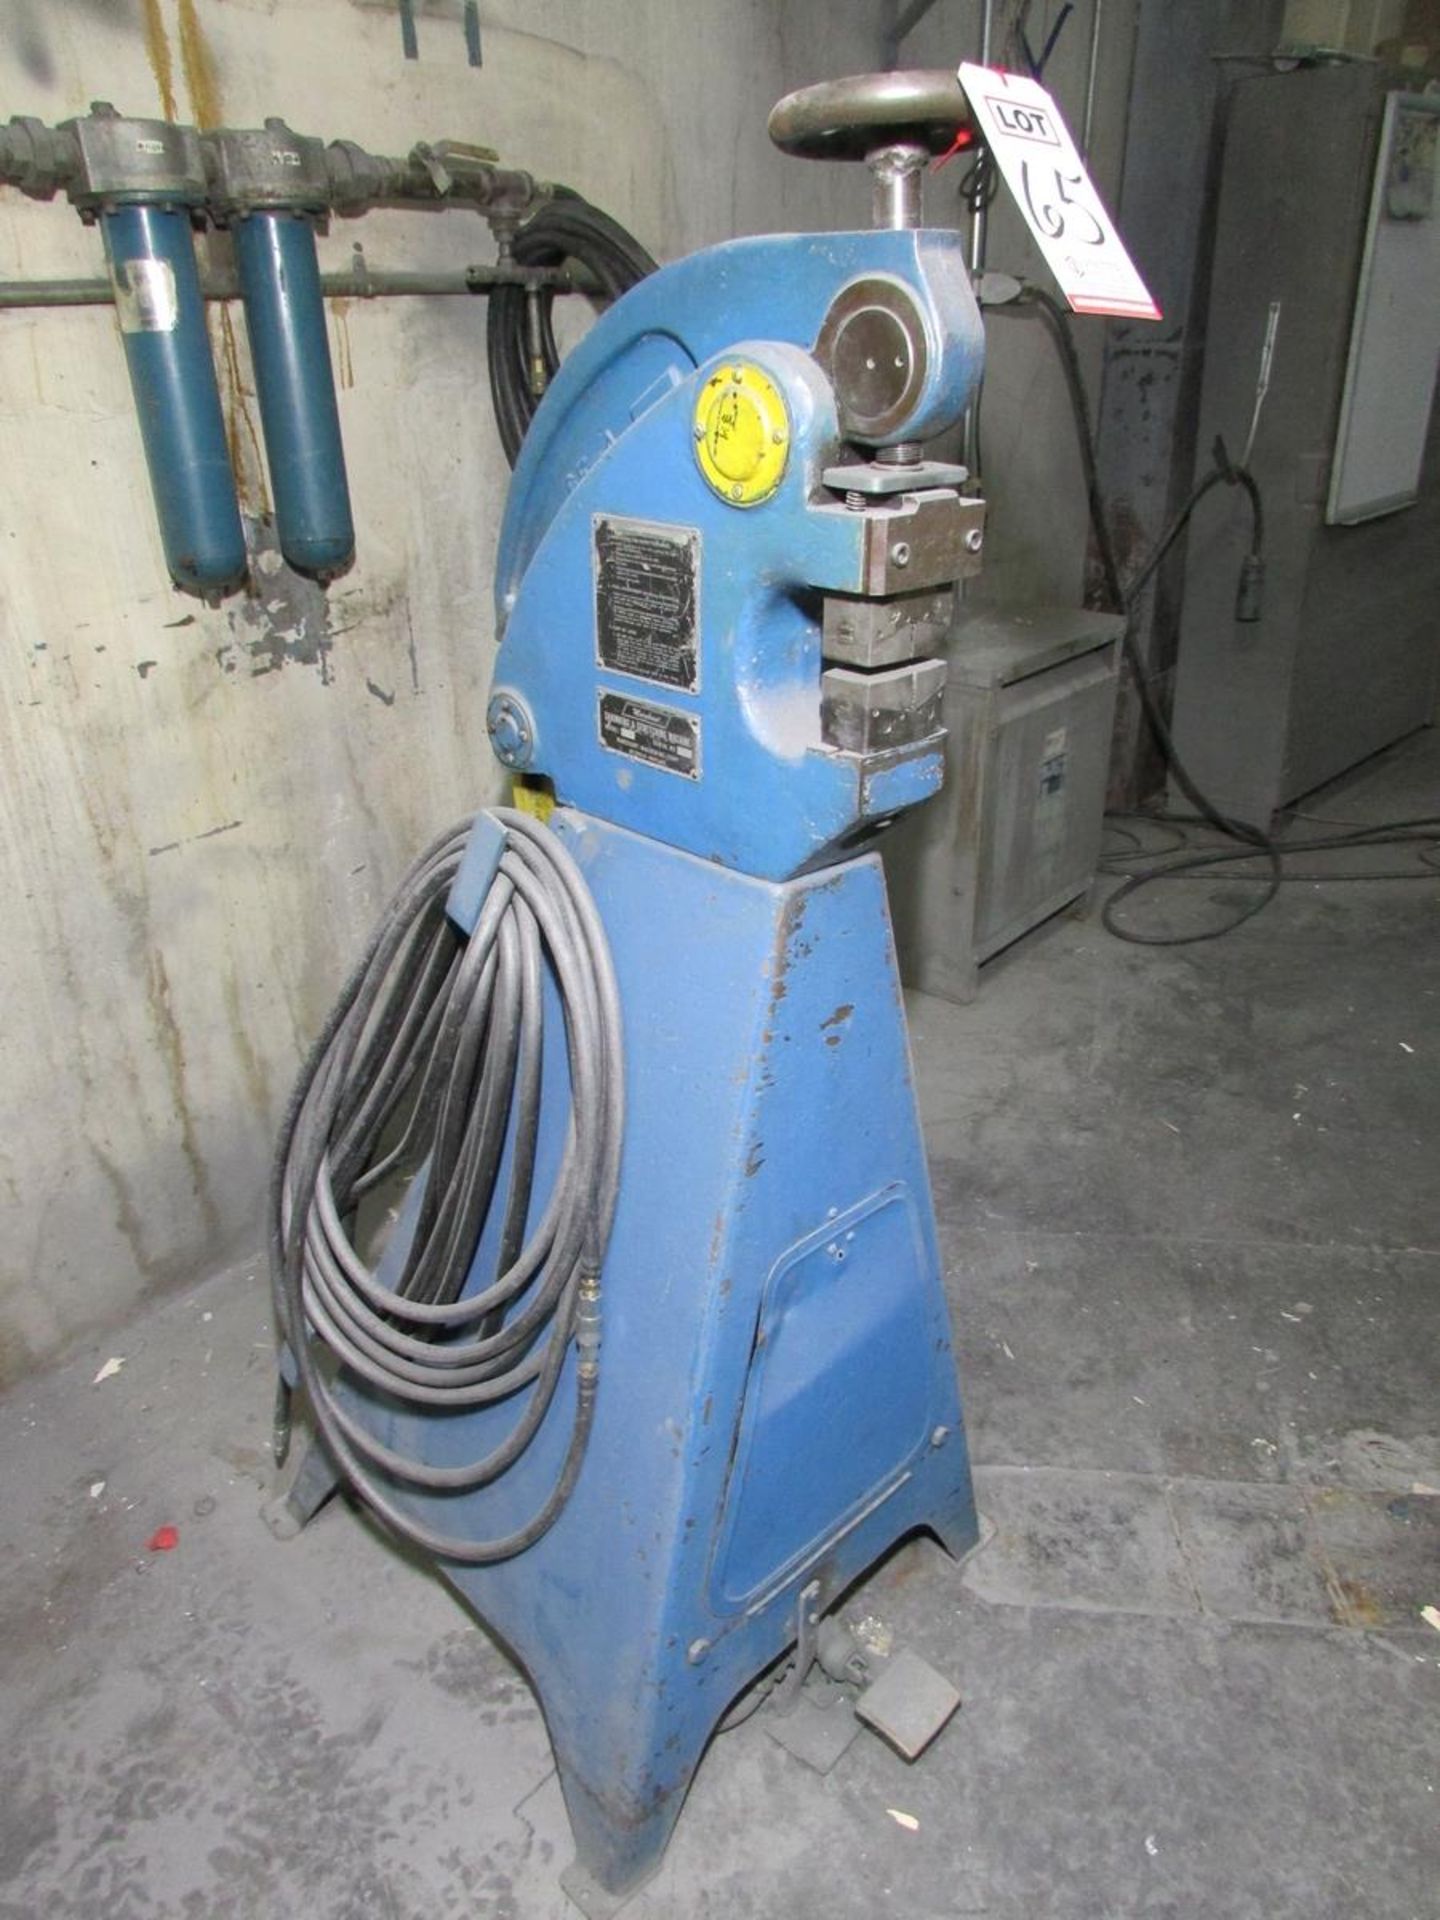 MARCHANT MACHINE CORP SHRINKING AND STRETCHING MACHINE, MODEL 4A, S/N 235